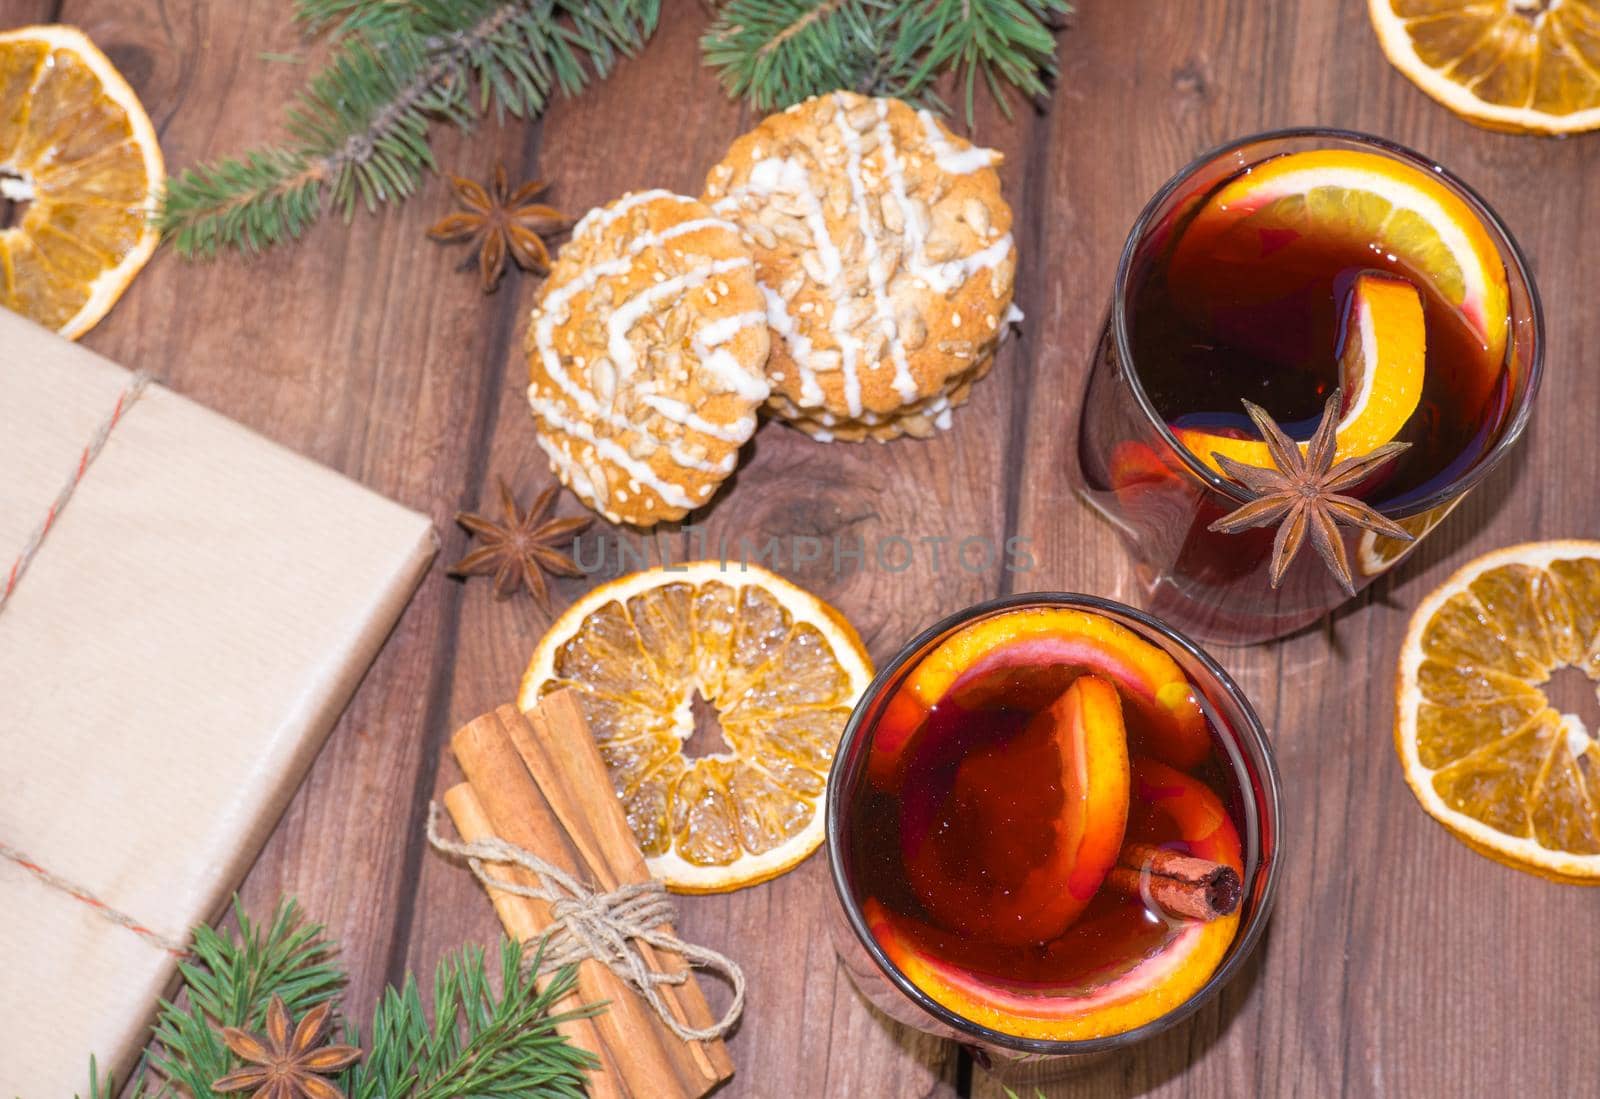 Mulled wine and spices on a wooden background with branches of a Christmas tree. Selective focus.